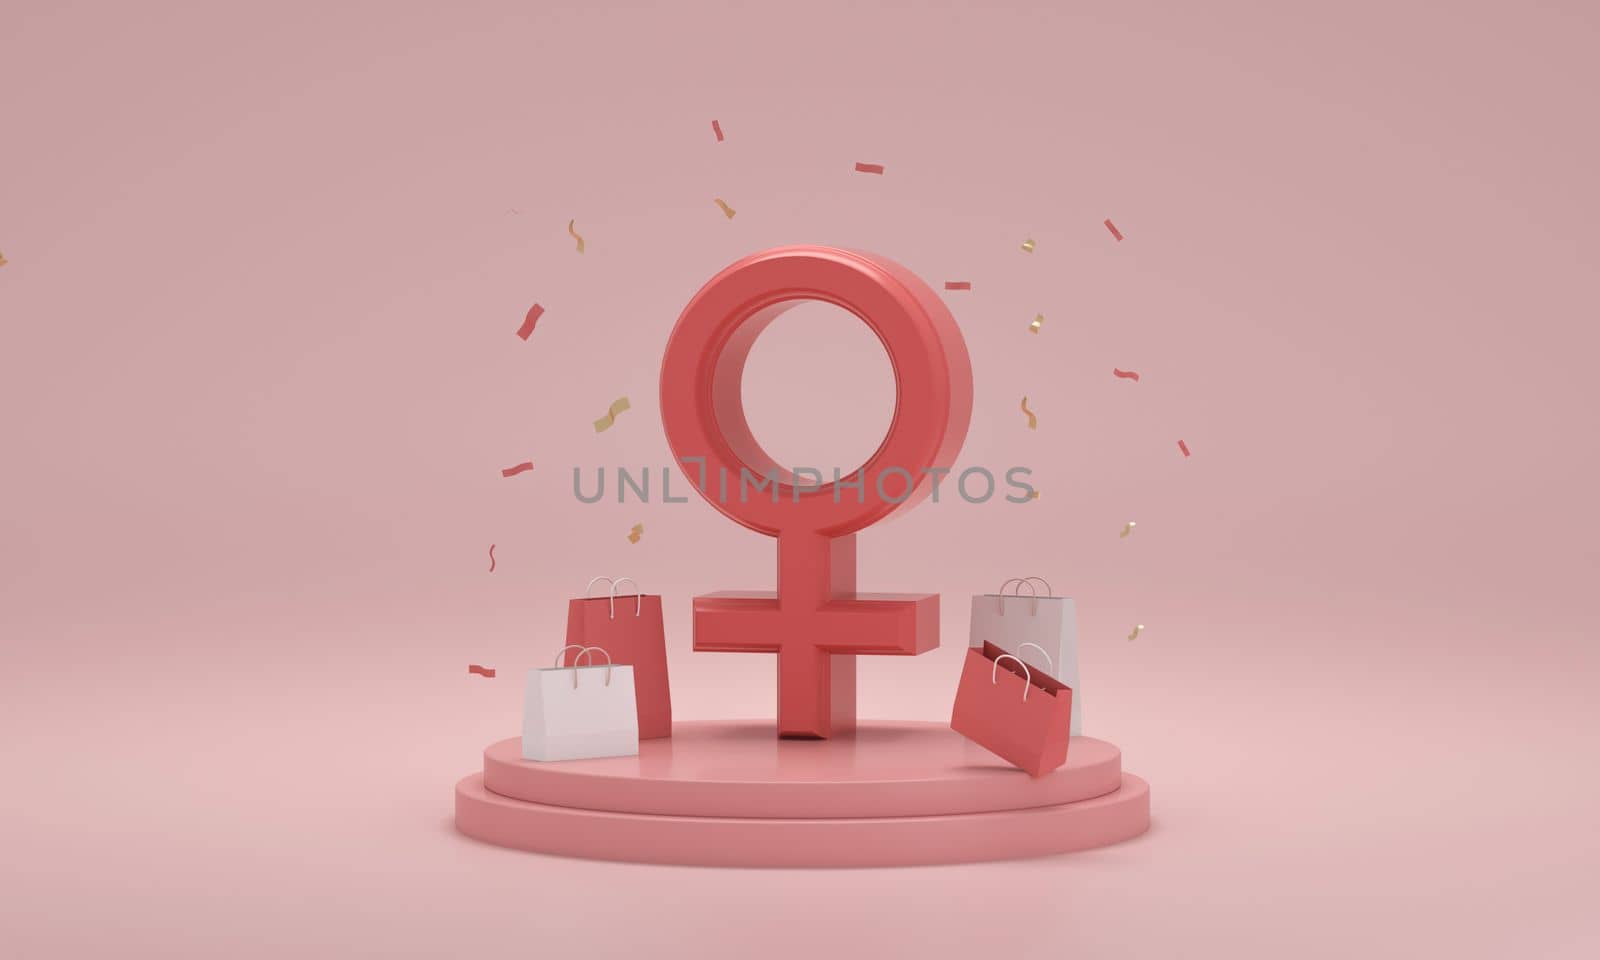 Female gender symbols and gift box on podium on pink background. Concept of International Women's Day. by ImagesRouges